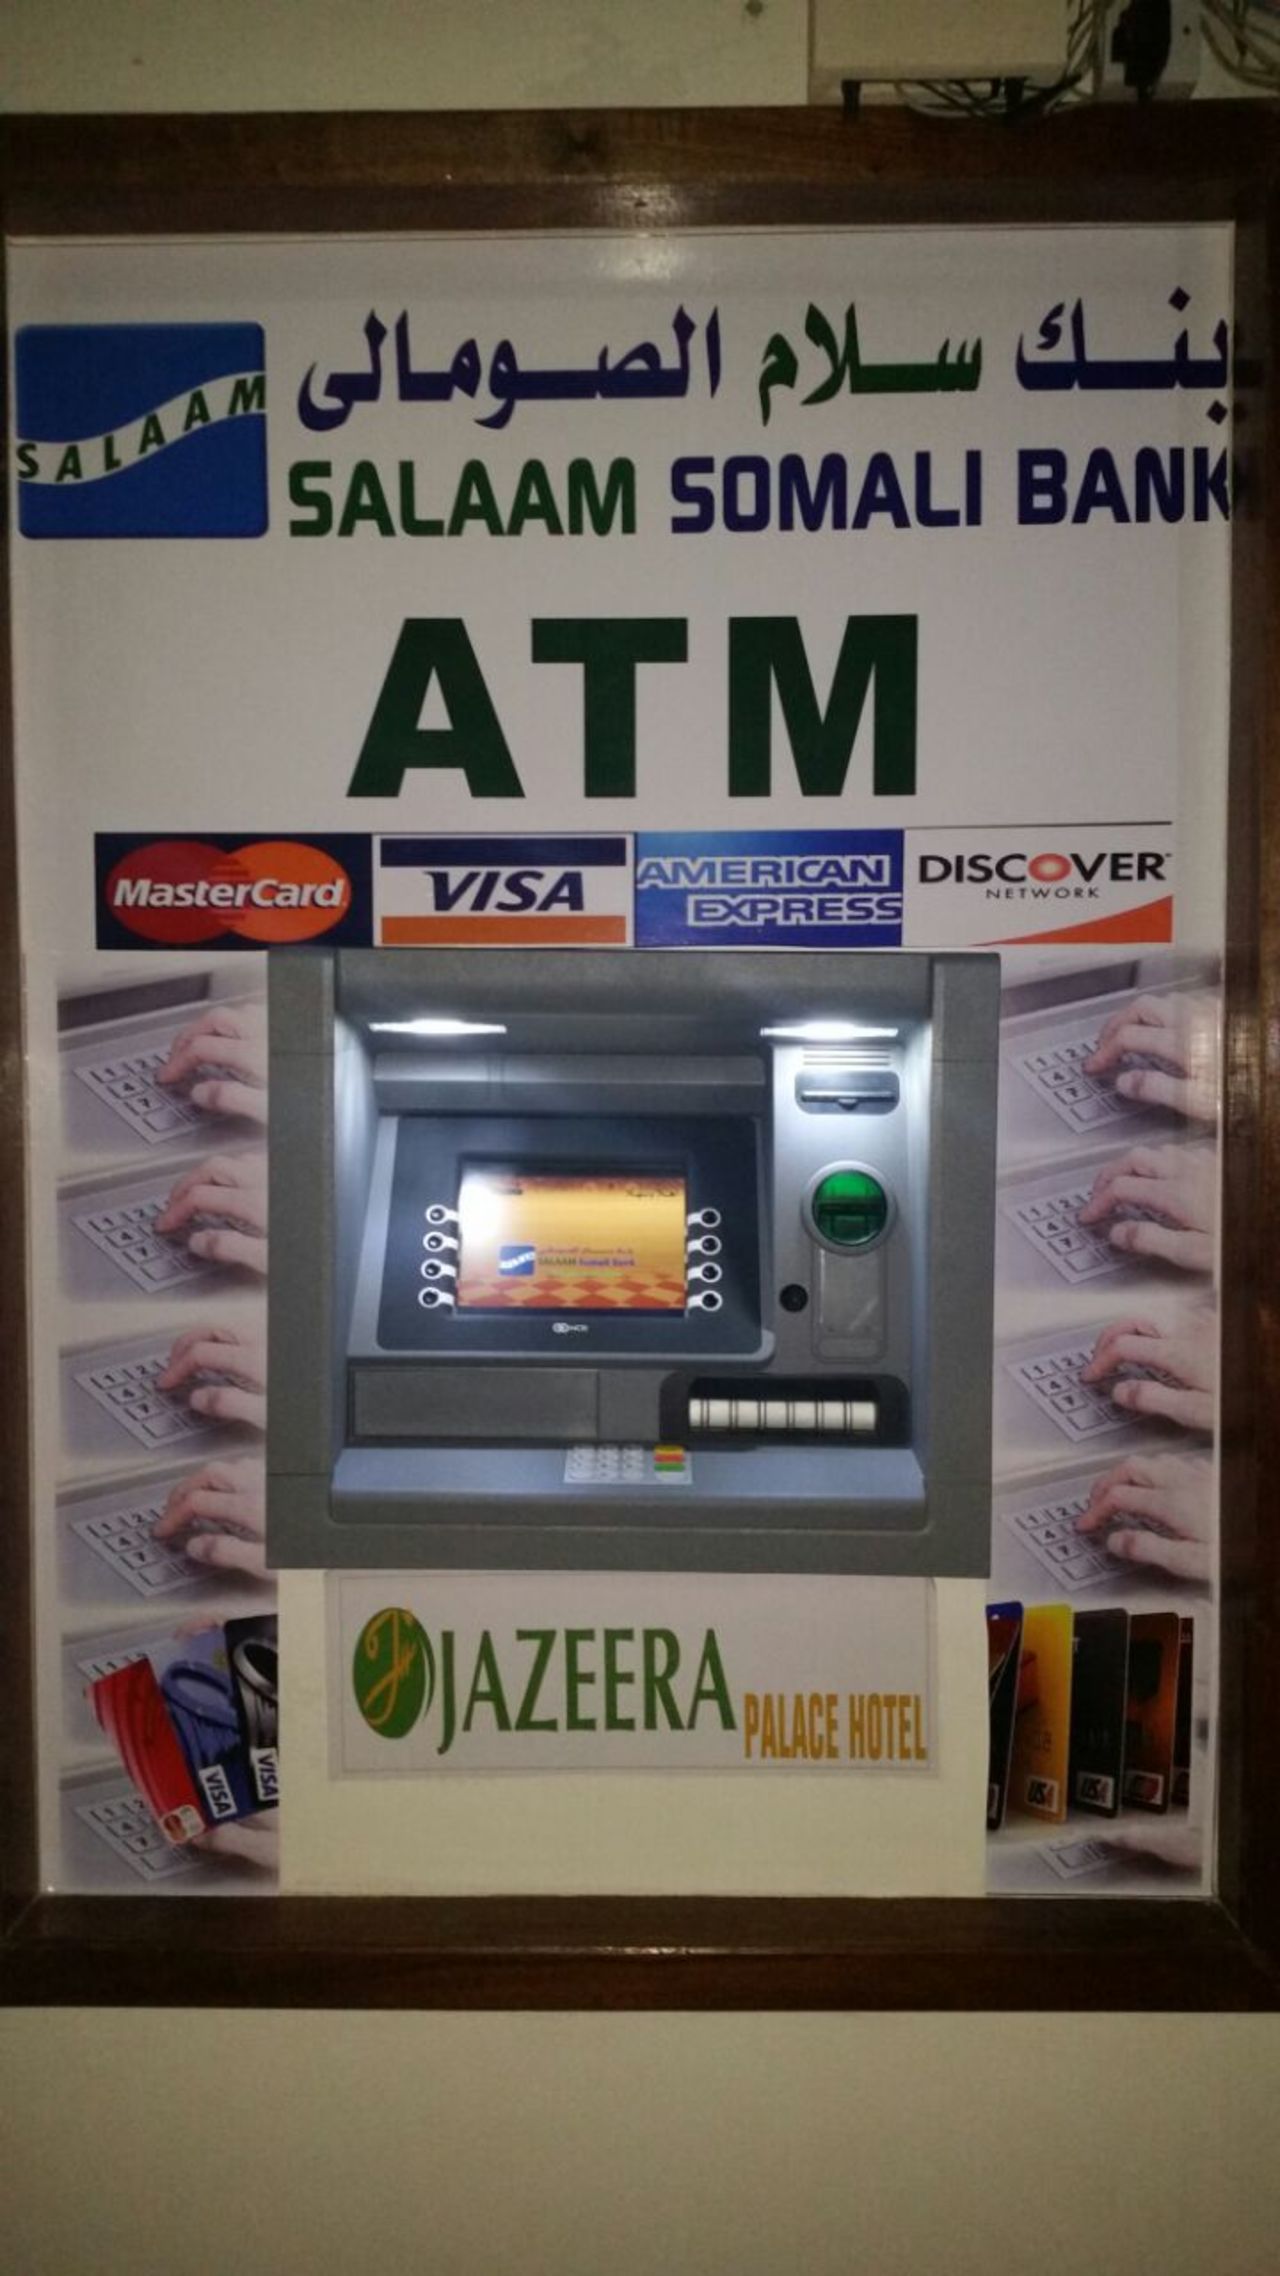 According to international money transfer business <a href="http://www.dahabshiil.com/about-us/dahabshiil-story.html" target="_blank" target="_blank">Dahabshill</a>, this ATM won't be the only one in Mogadishu for long. The company says it will launch its ATM project in the city "shortly."